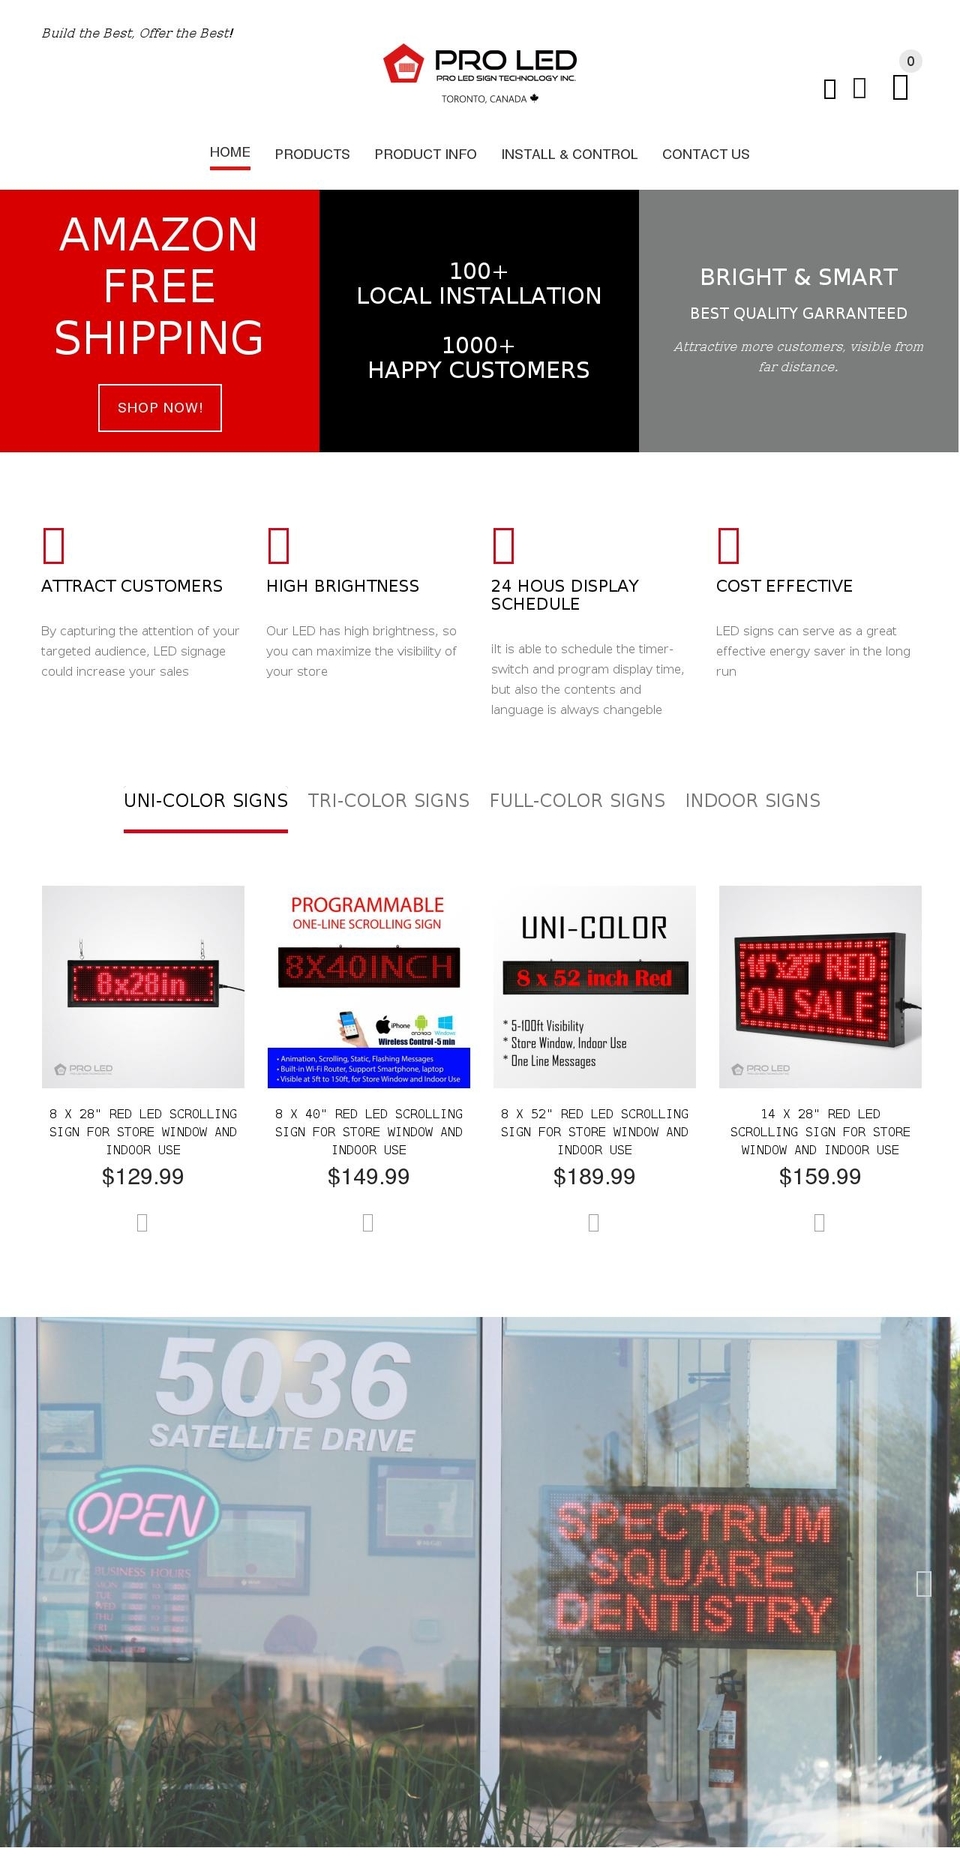 YourStore Shopify theme site example ledsign4life.ca